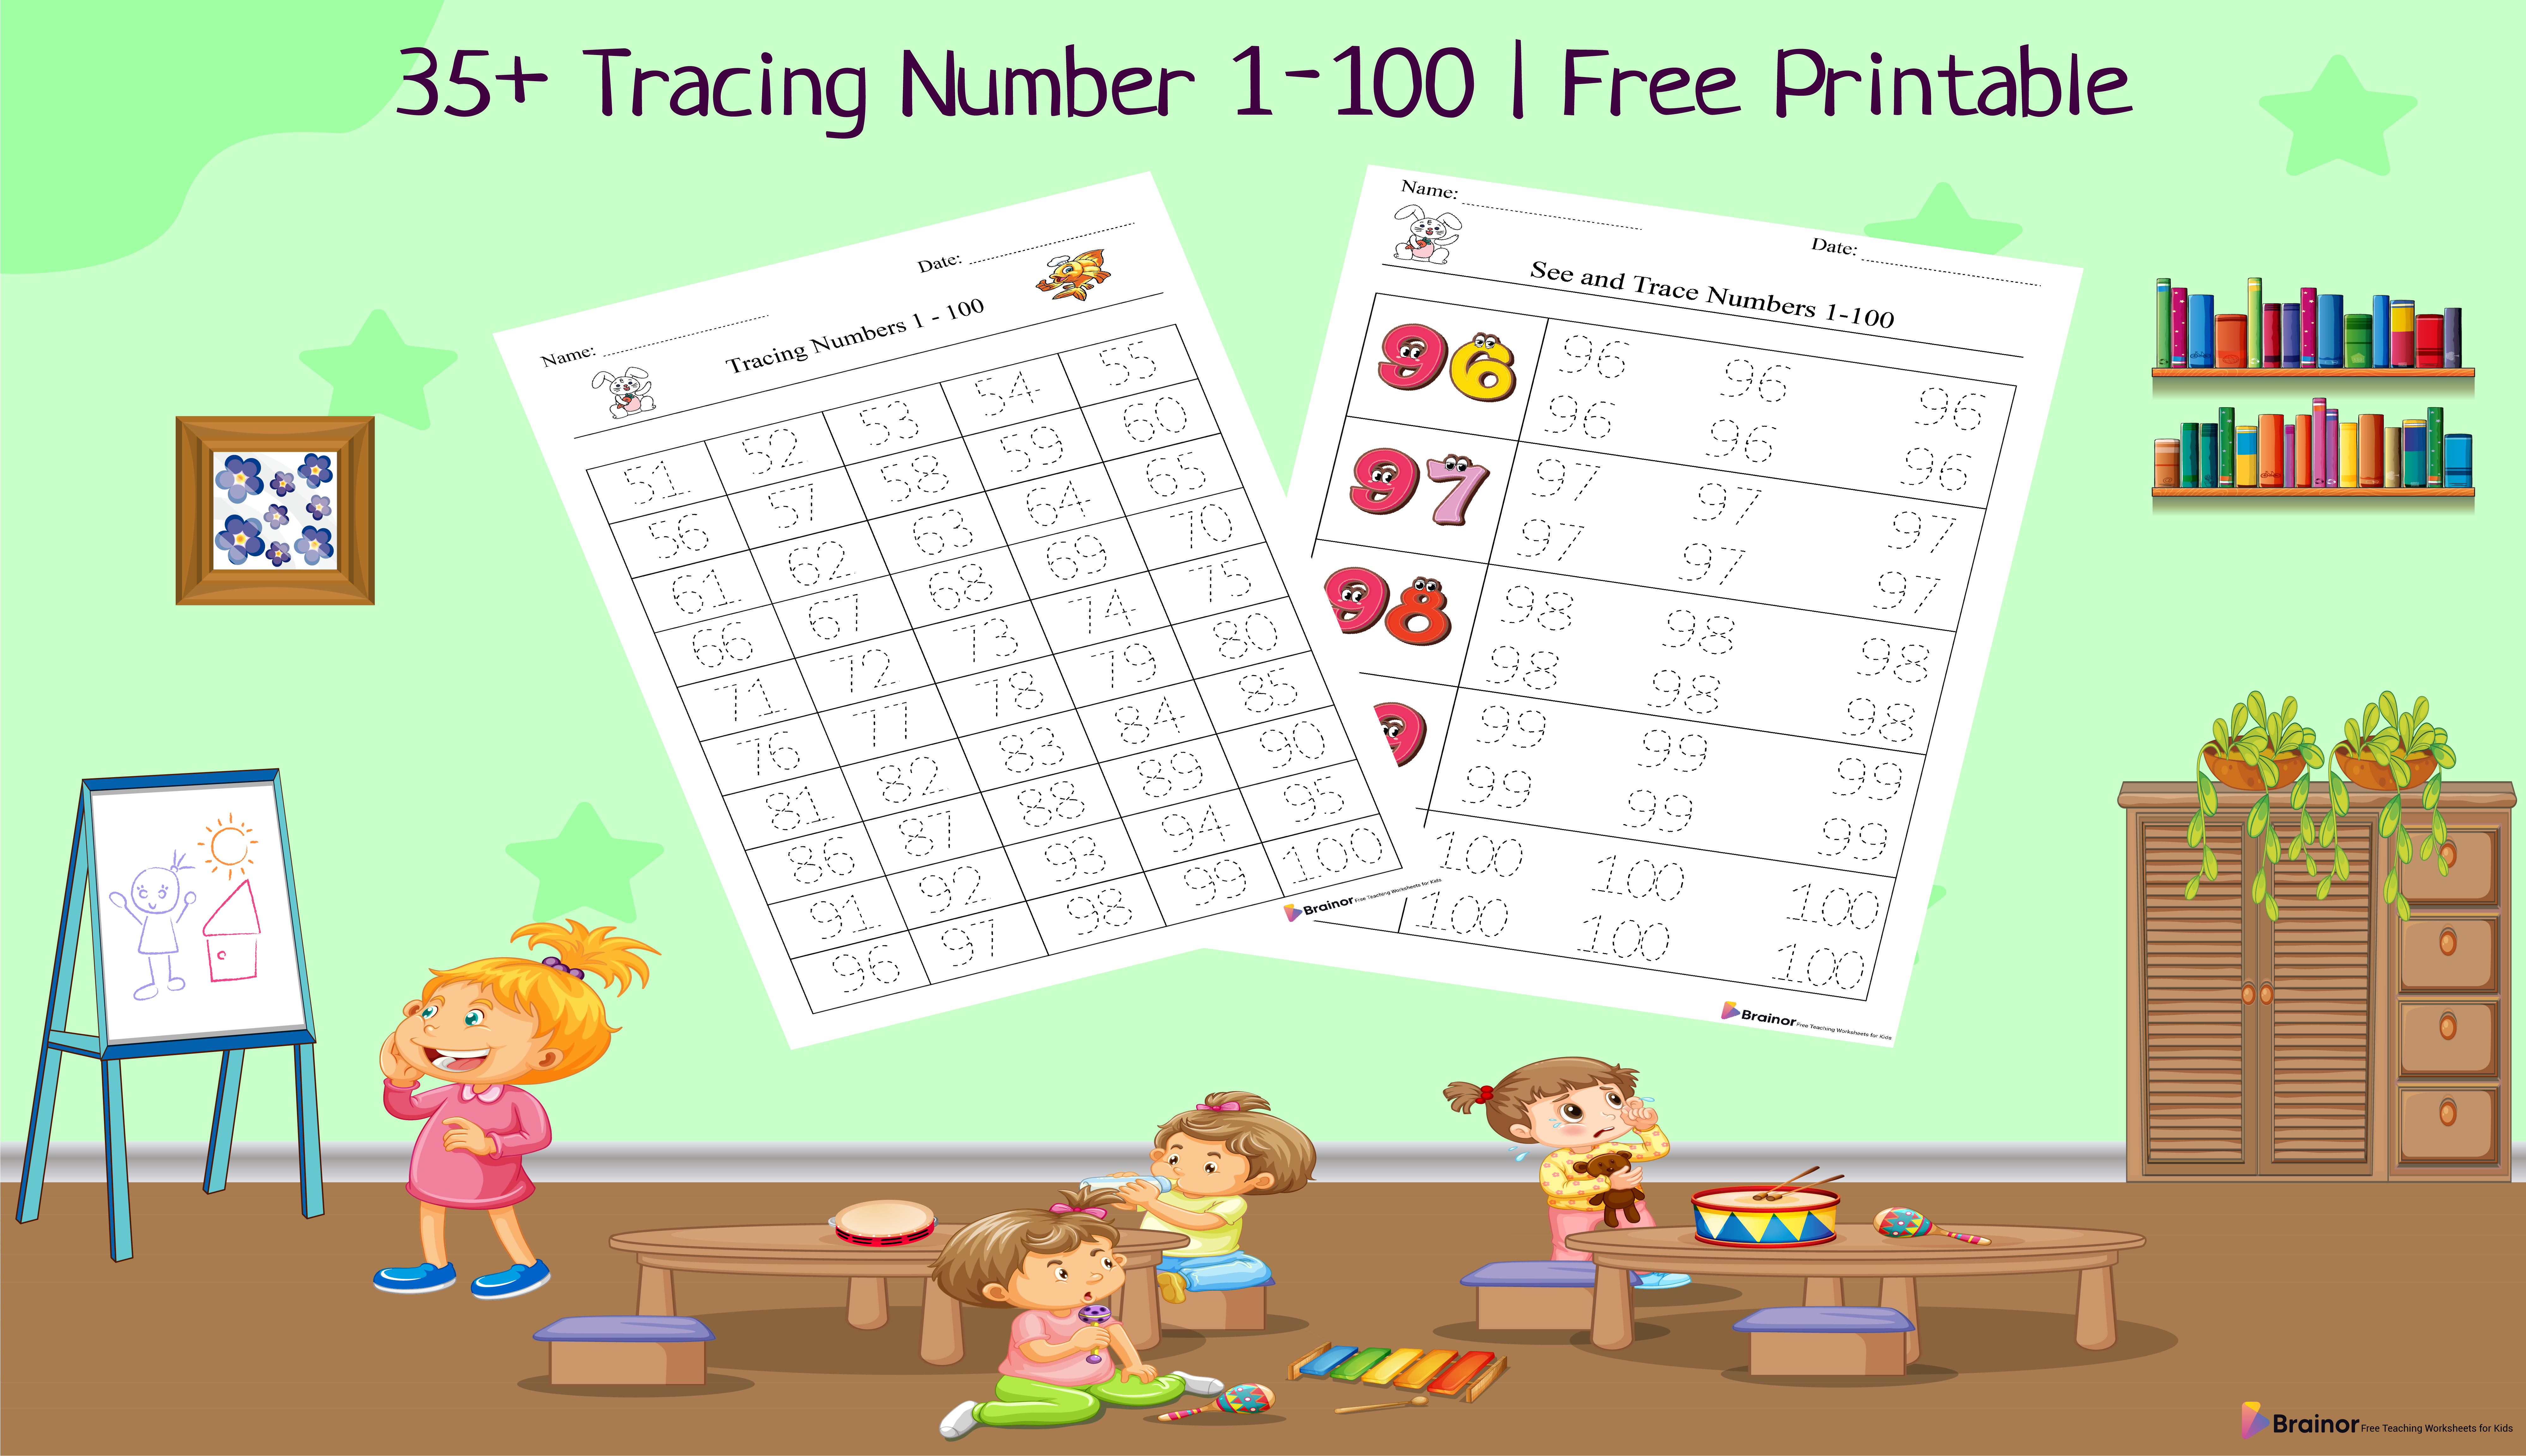 tracing number 1 - 100 - overview